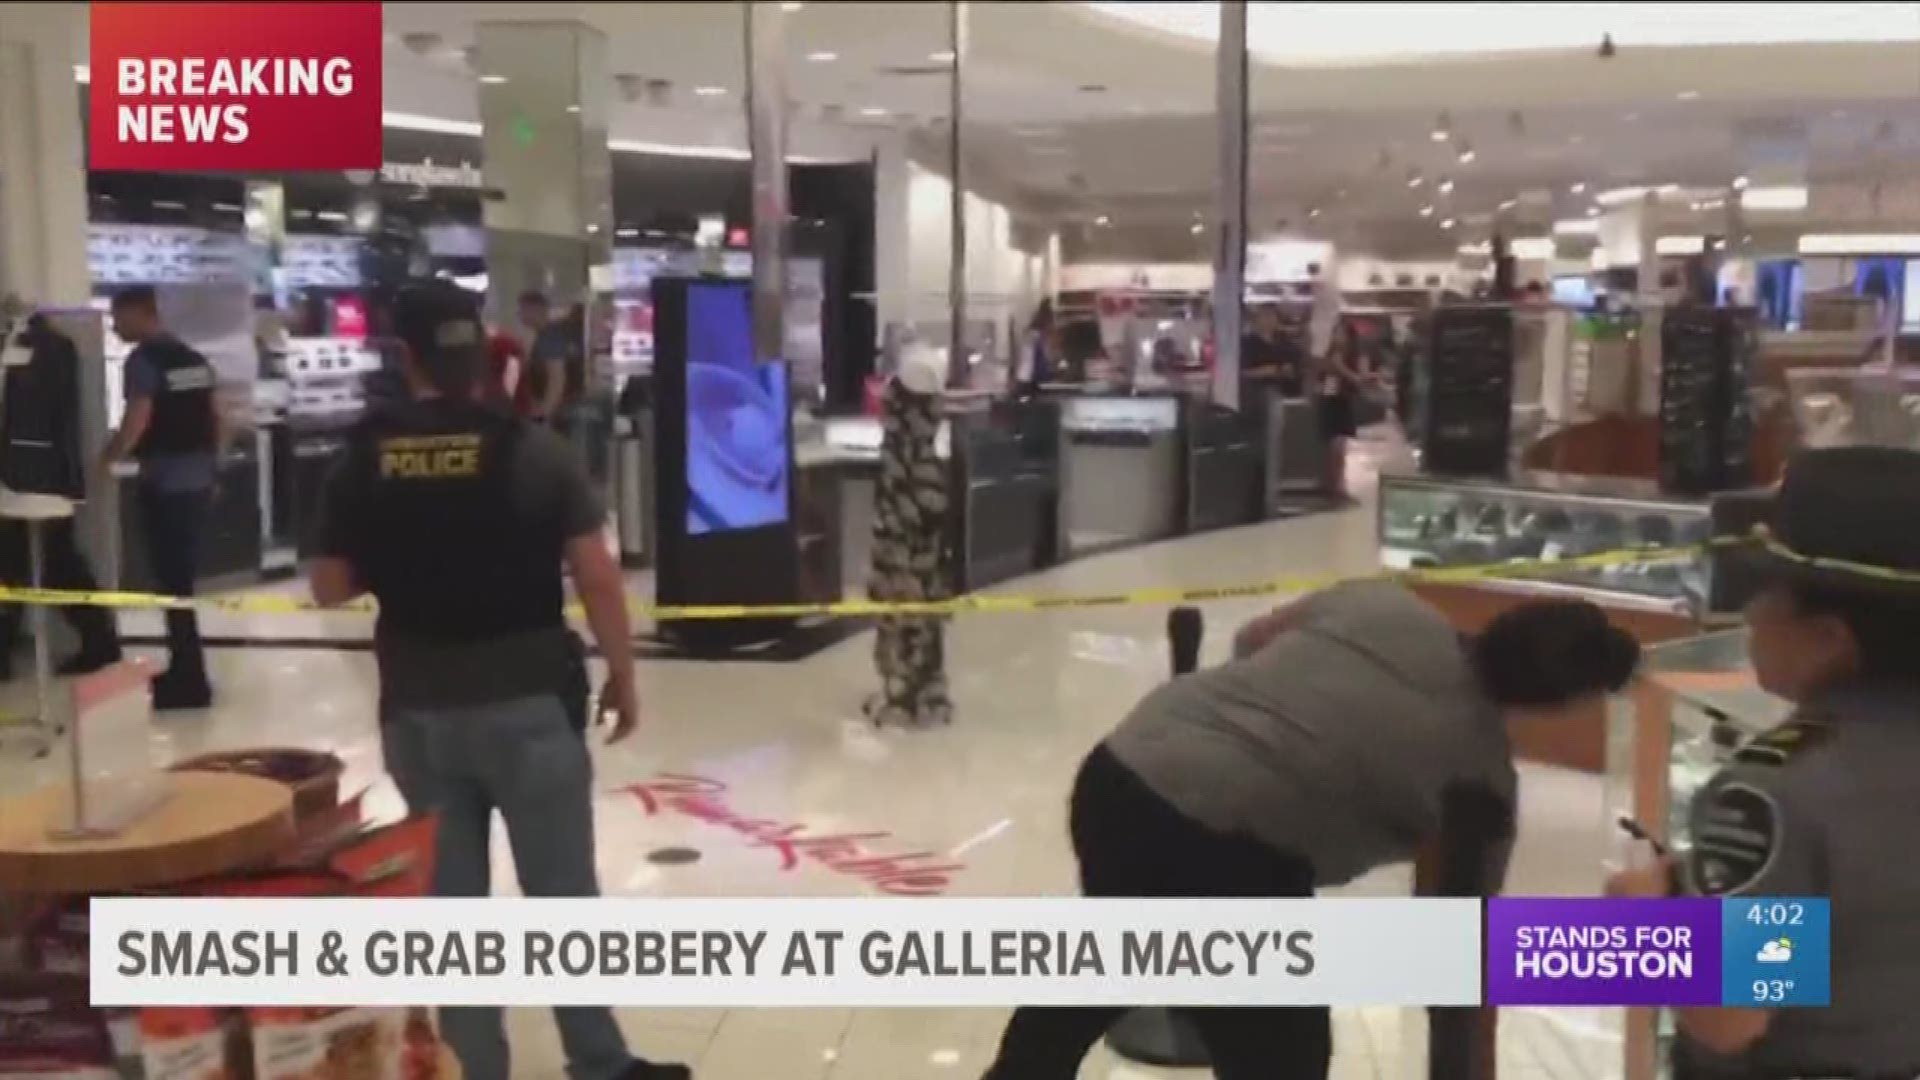 Police are searching for two men accused of robbing a business in the Galleria Mall on Wednesday. 